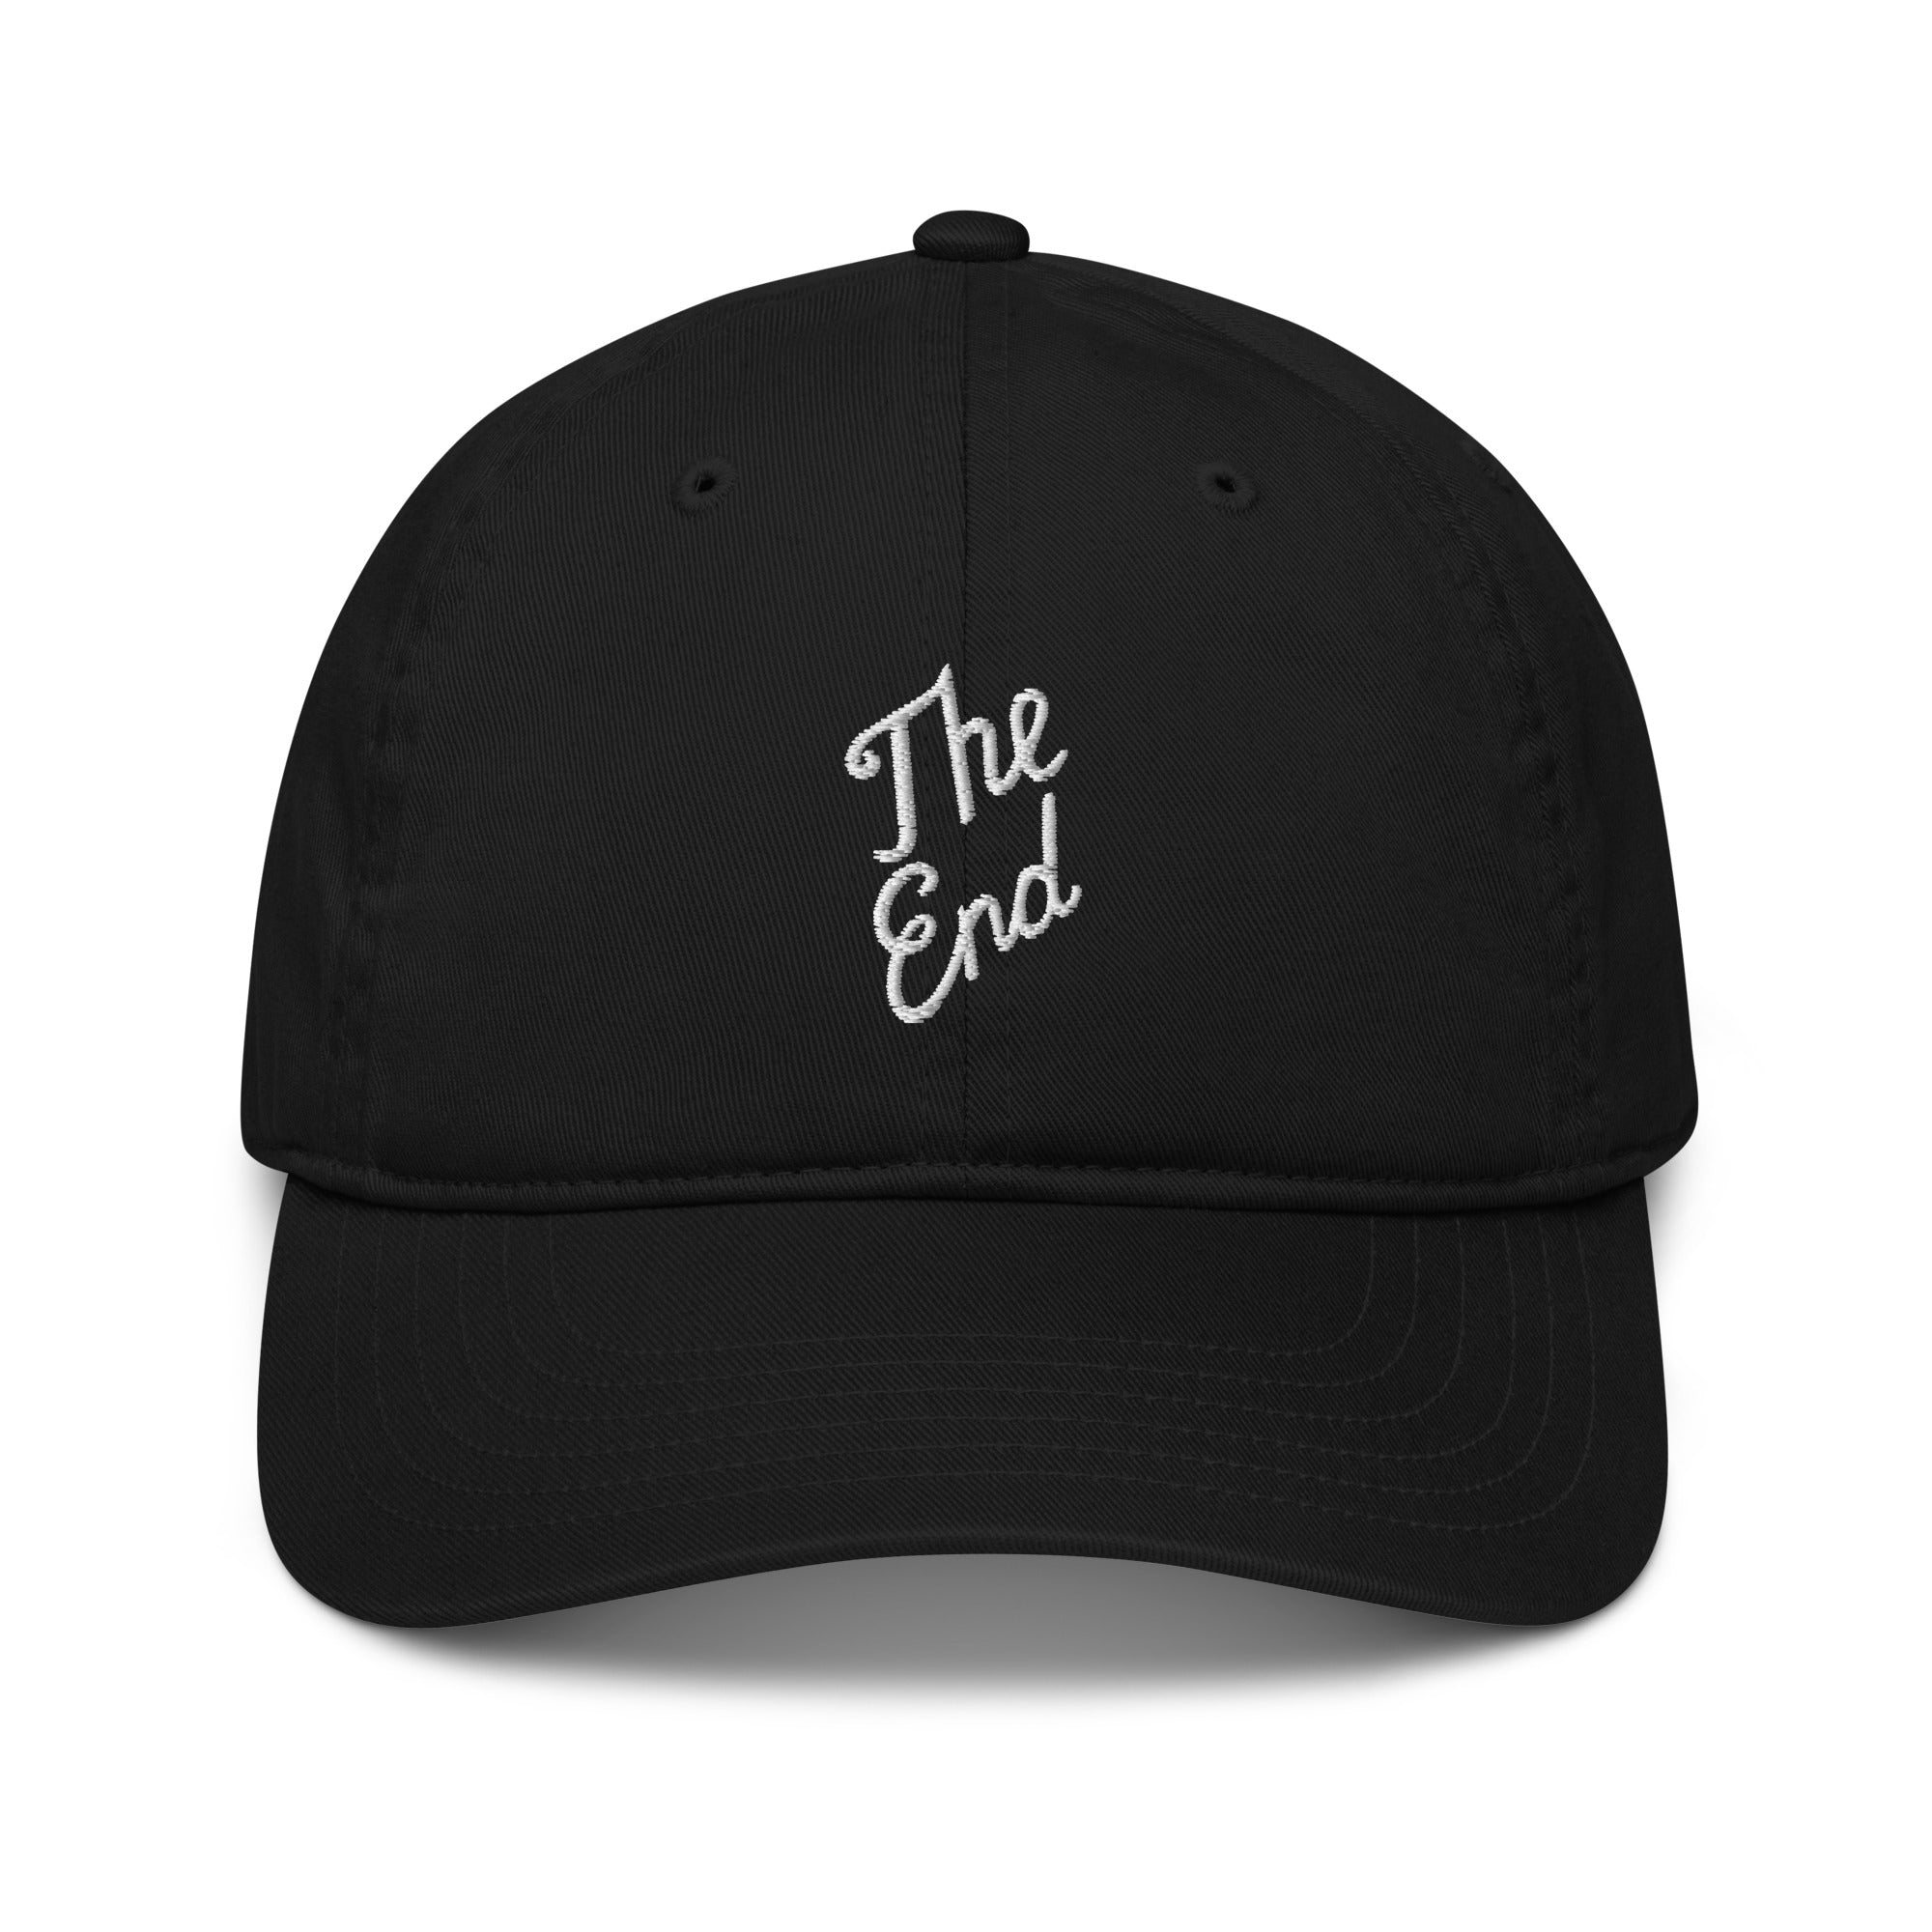 Casquette brodée - "THE END" -  from chtmboutique by chtmboutique - baseball, CINEMA, THE END